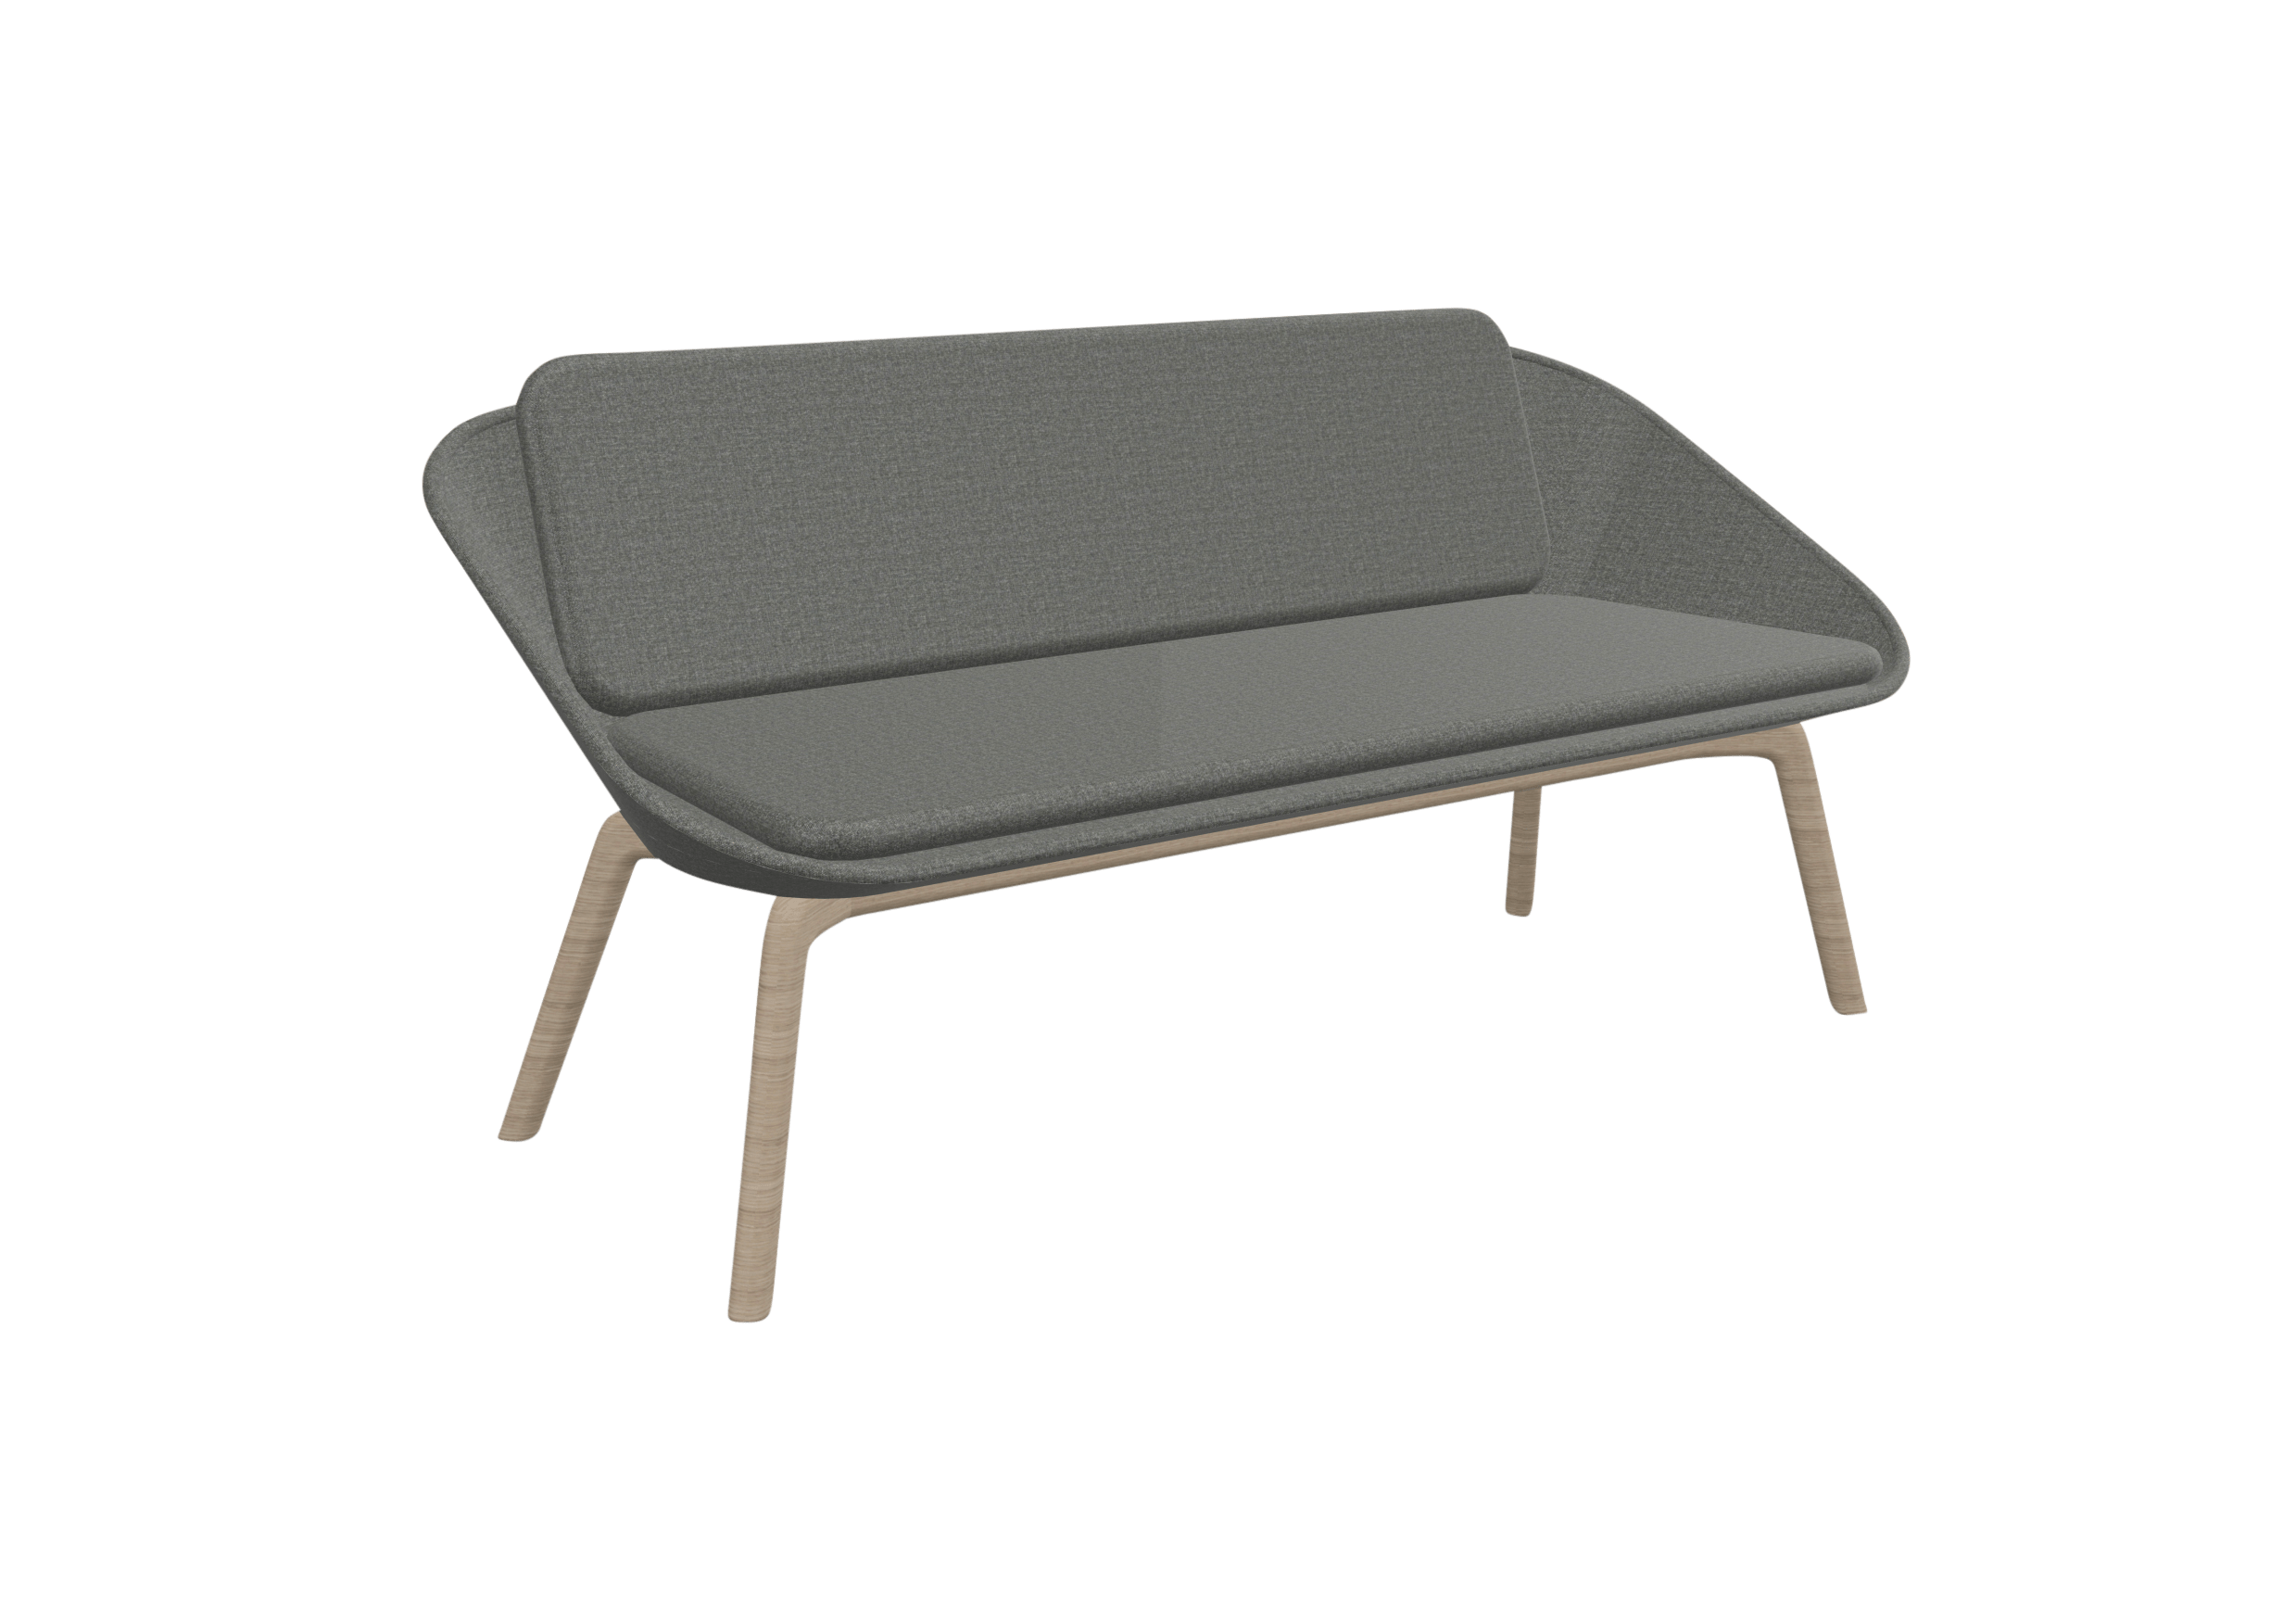 A grey sofa with wooden legs